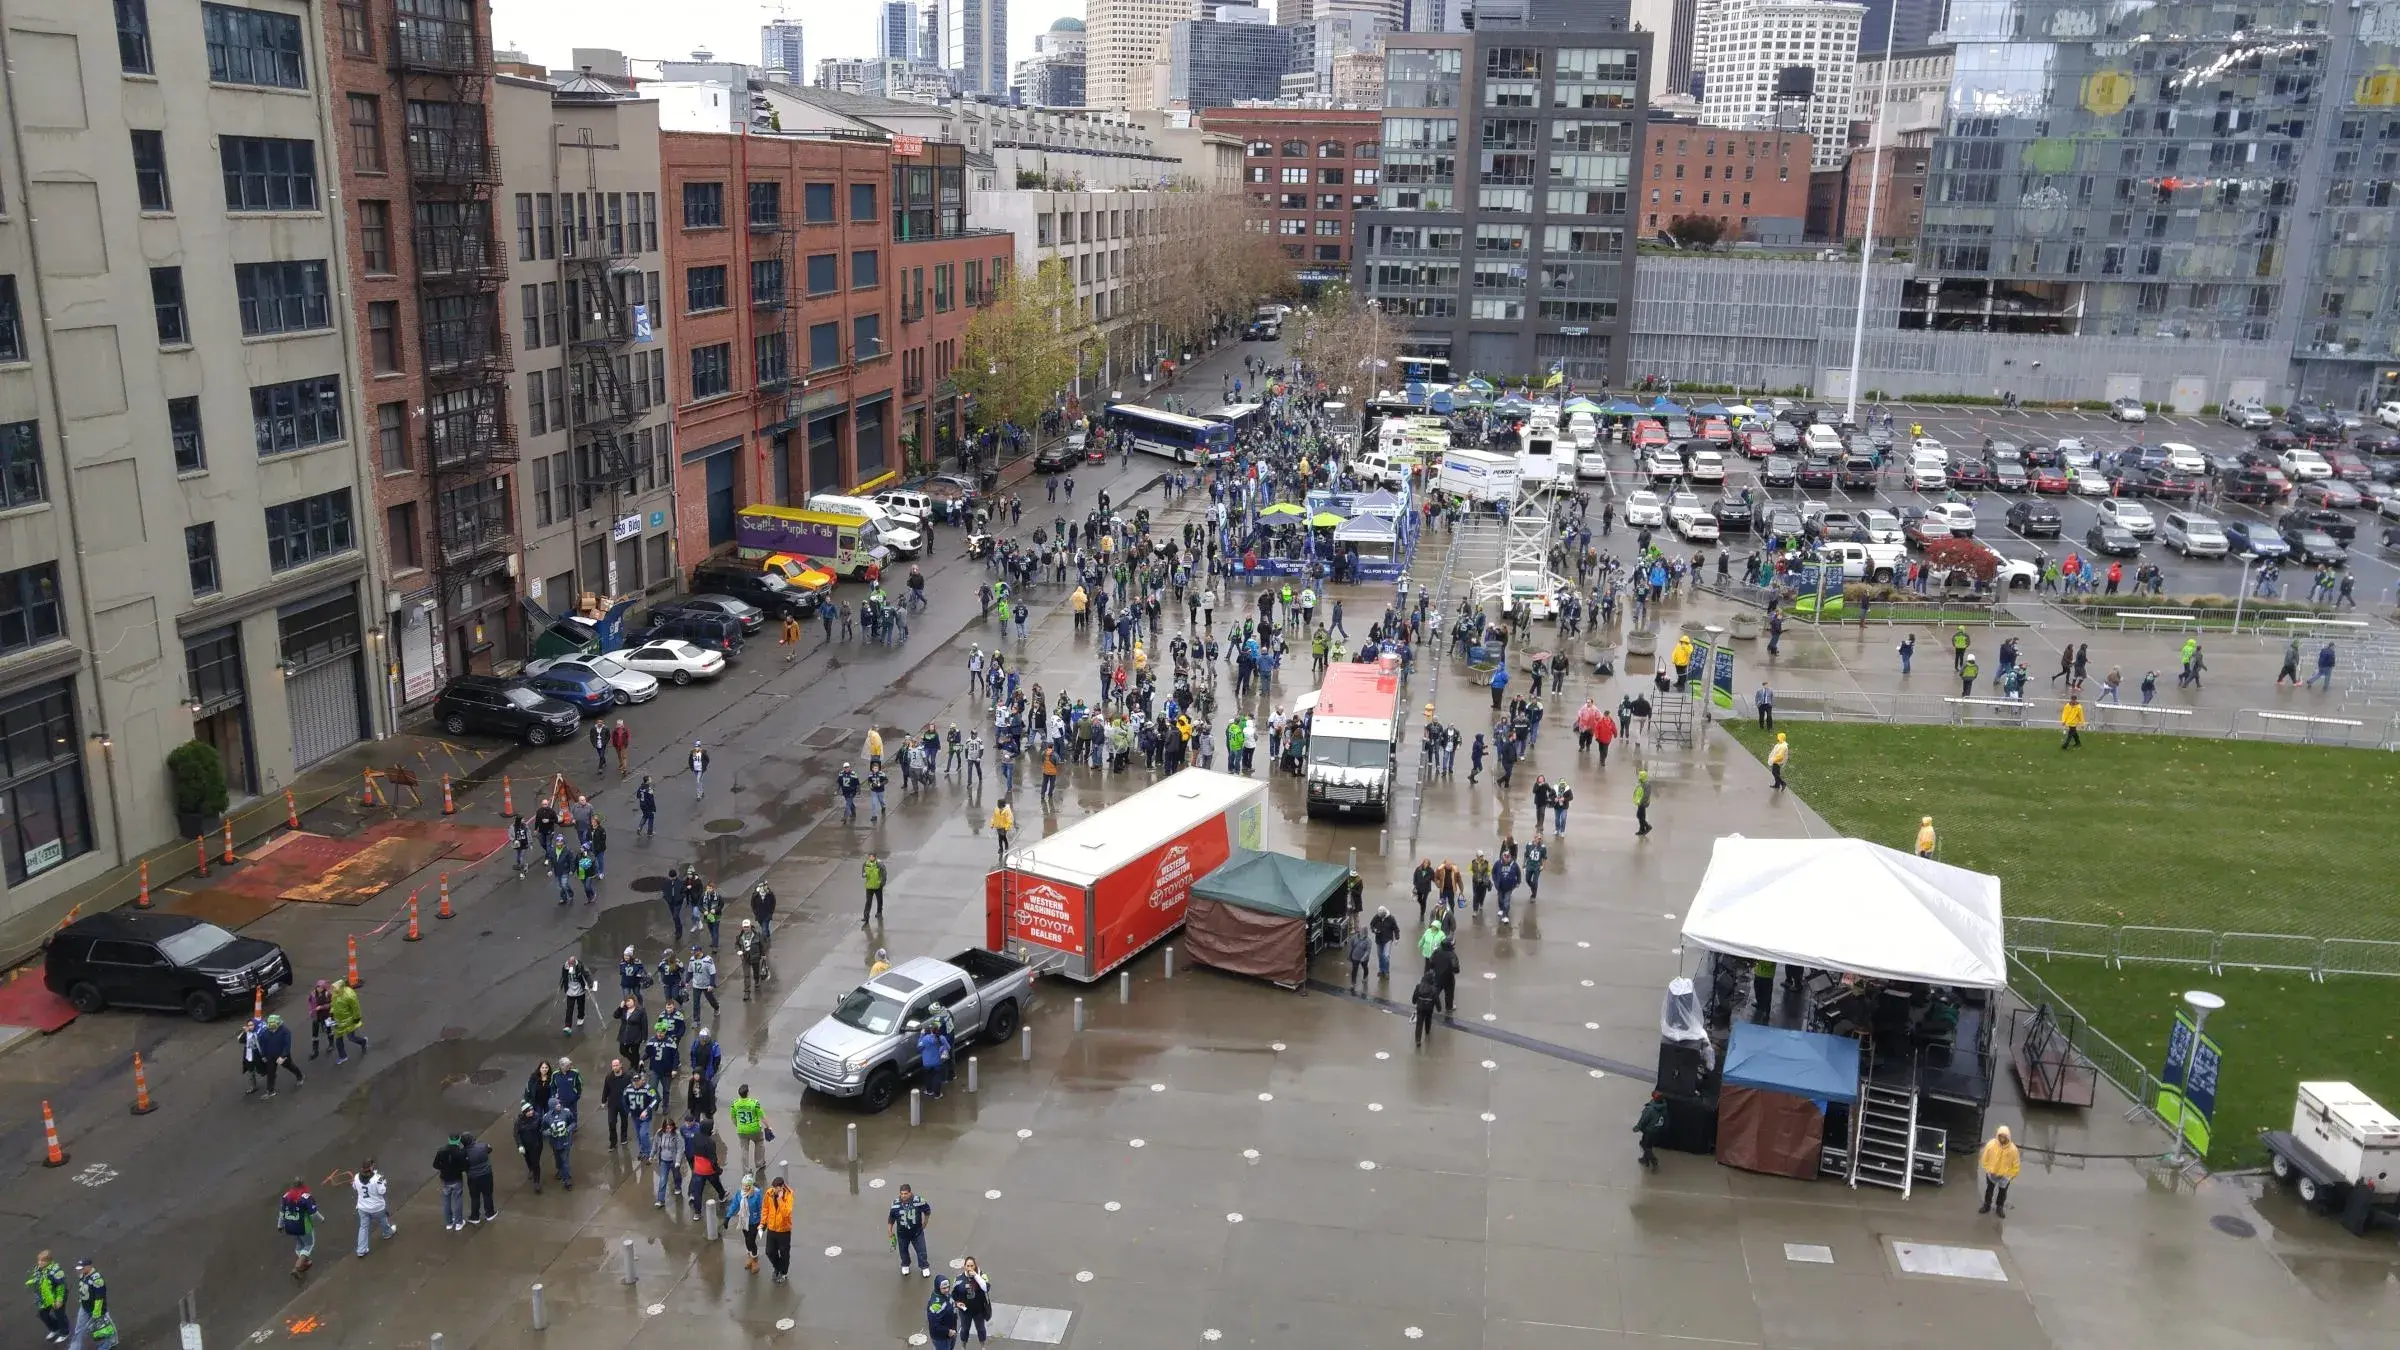 A 180-degree view maximizes visibility and can be applied in busy locations, like CenturyLink Field, where the Immersive Imaging System is currently being demonstrated.